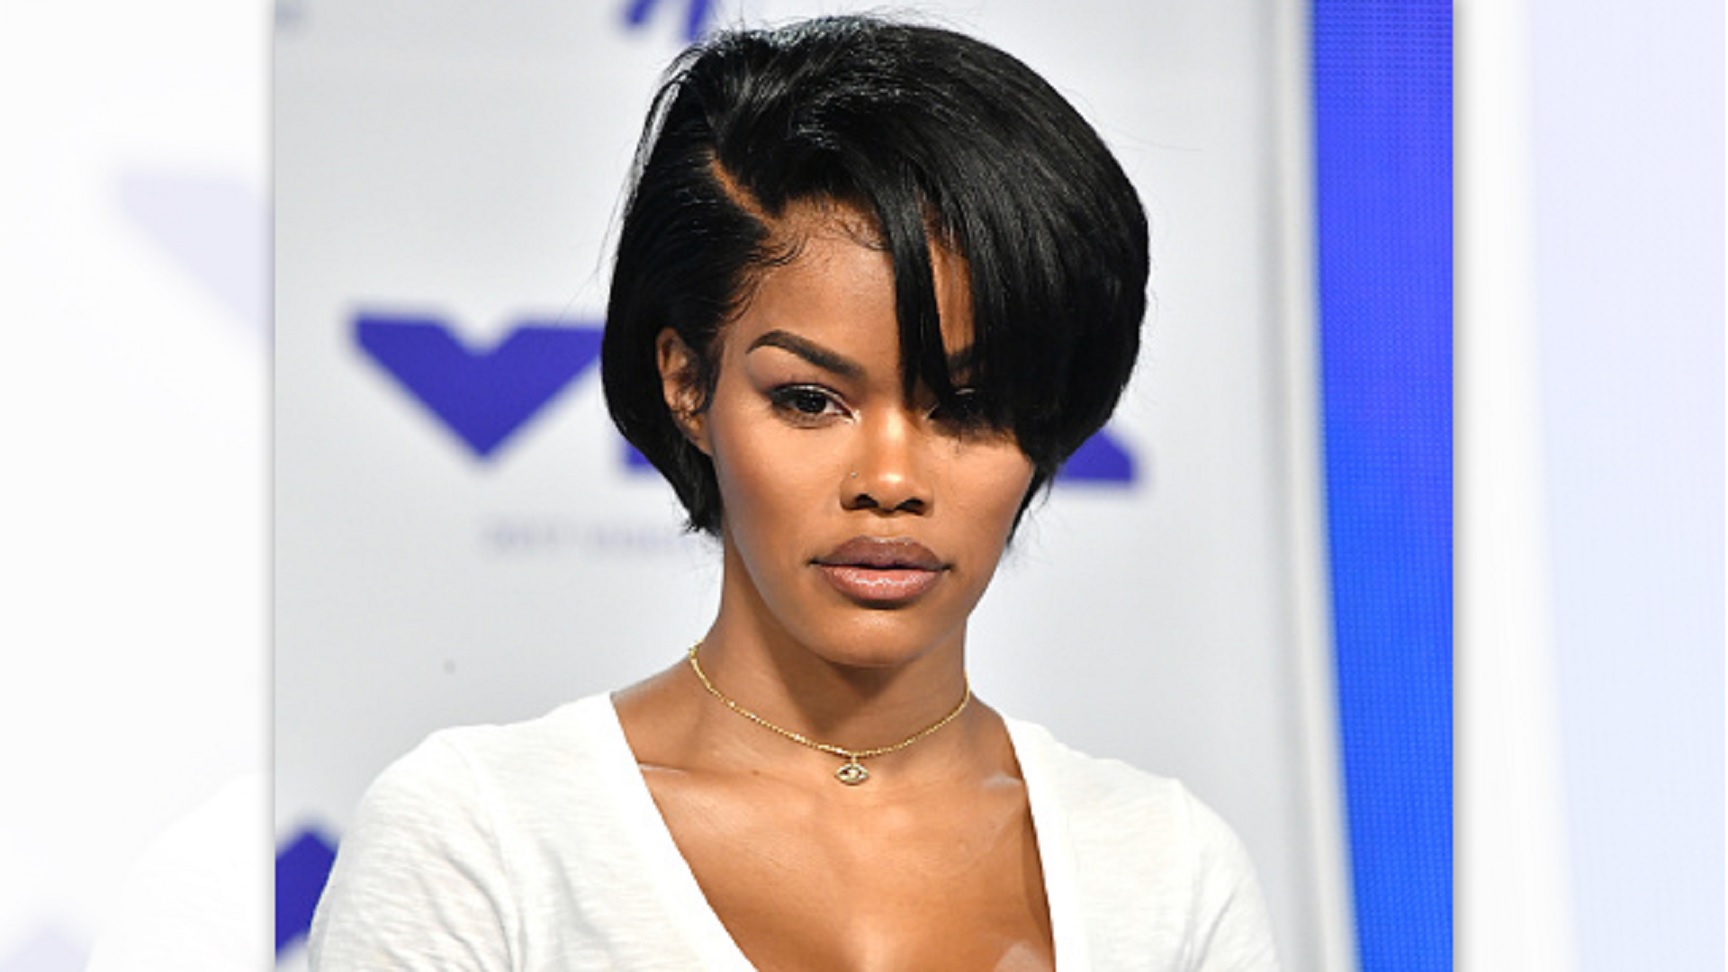 Weeks After Announcing Her Retirement, Teyana Taylor Earns Career-First Platinum Hit Single